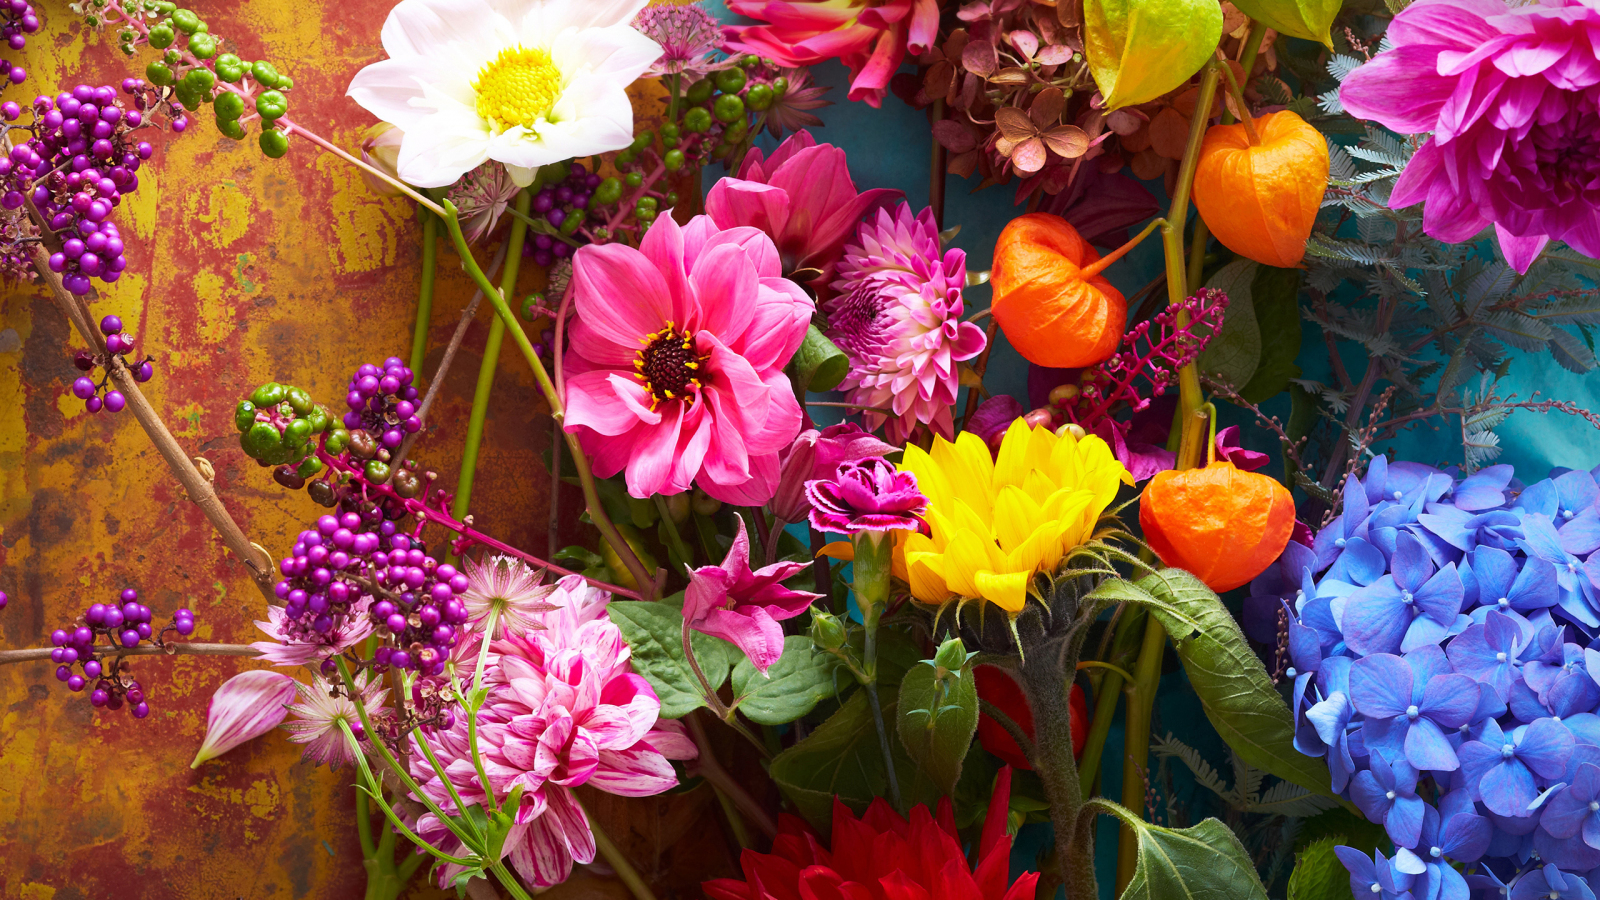 Download wallpaper 1600x900 flowers, bright & colorful, fresh, 16:9  widescreen 1600x900 hd background, 24397